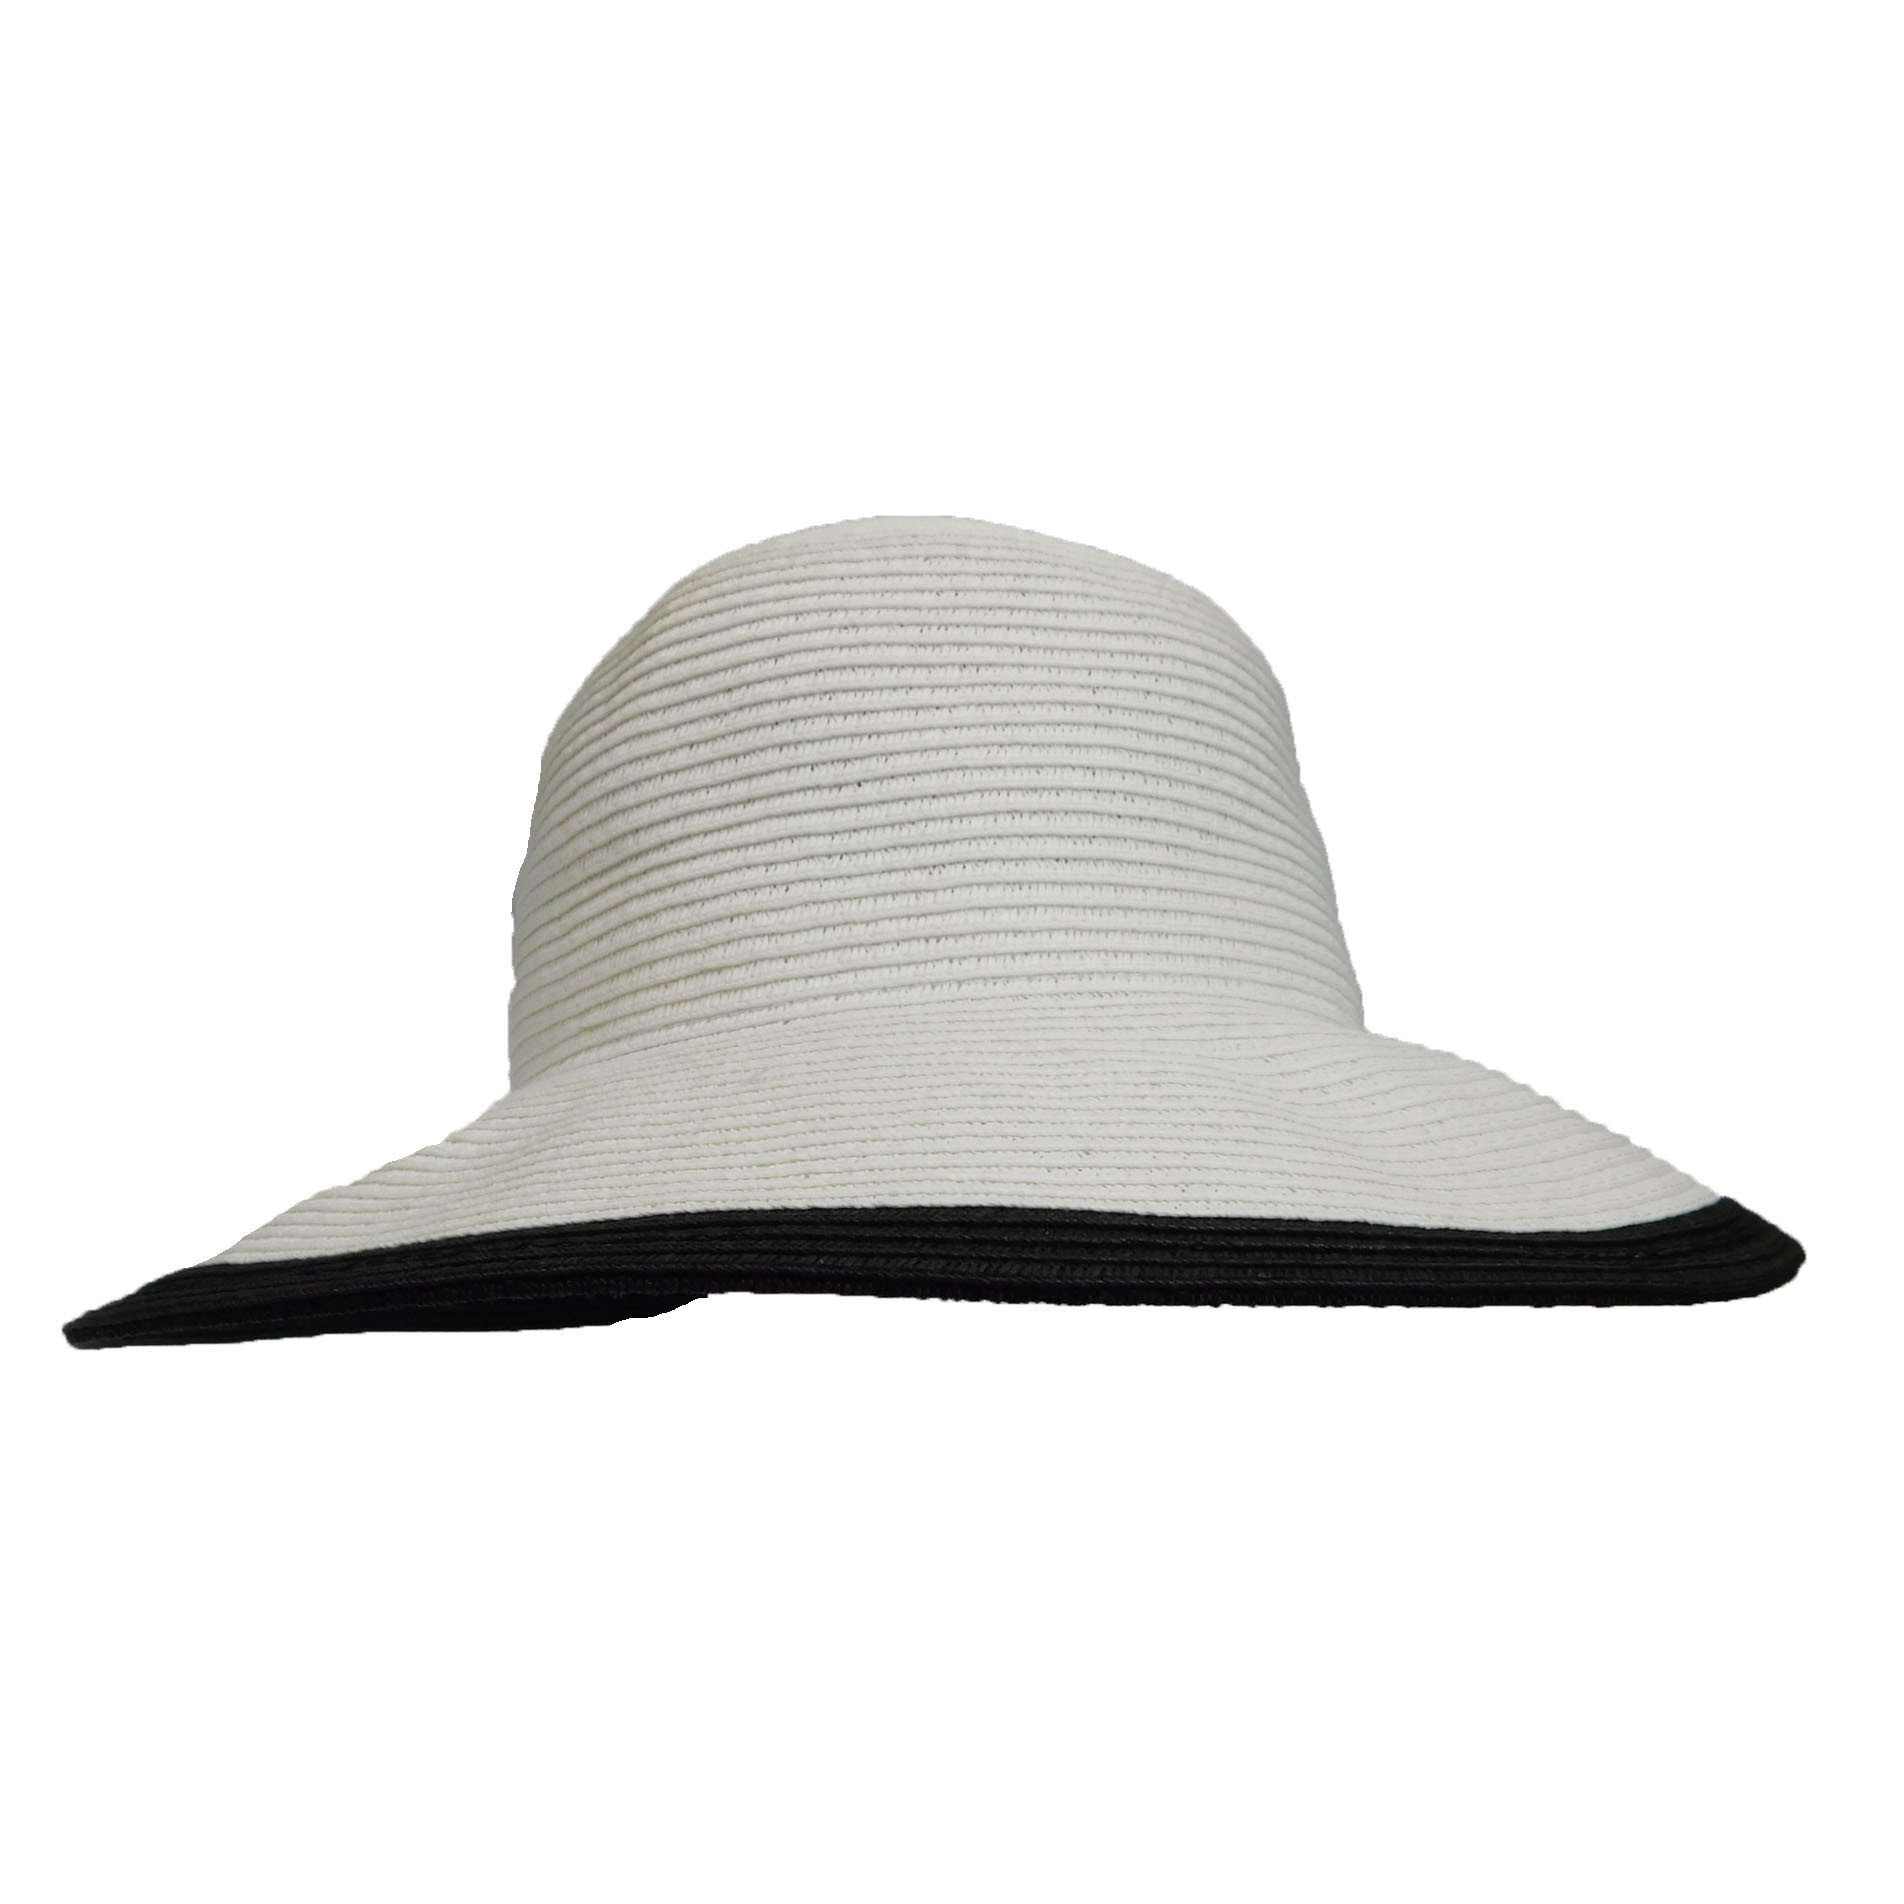 Black and White Sun Hat with Large Straw Bow - DNMC Hats Wide Brim Hat Boardwalk Style Hats    